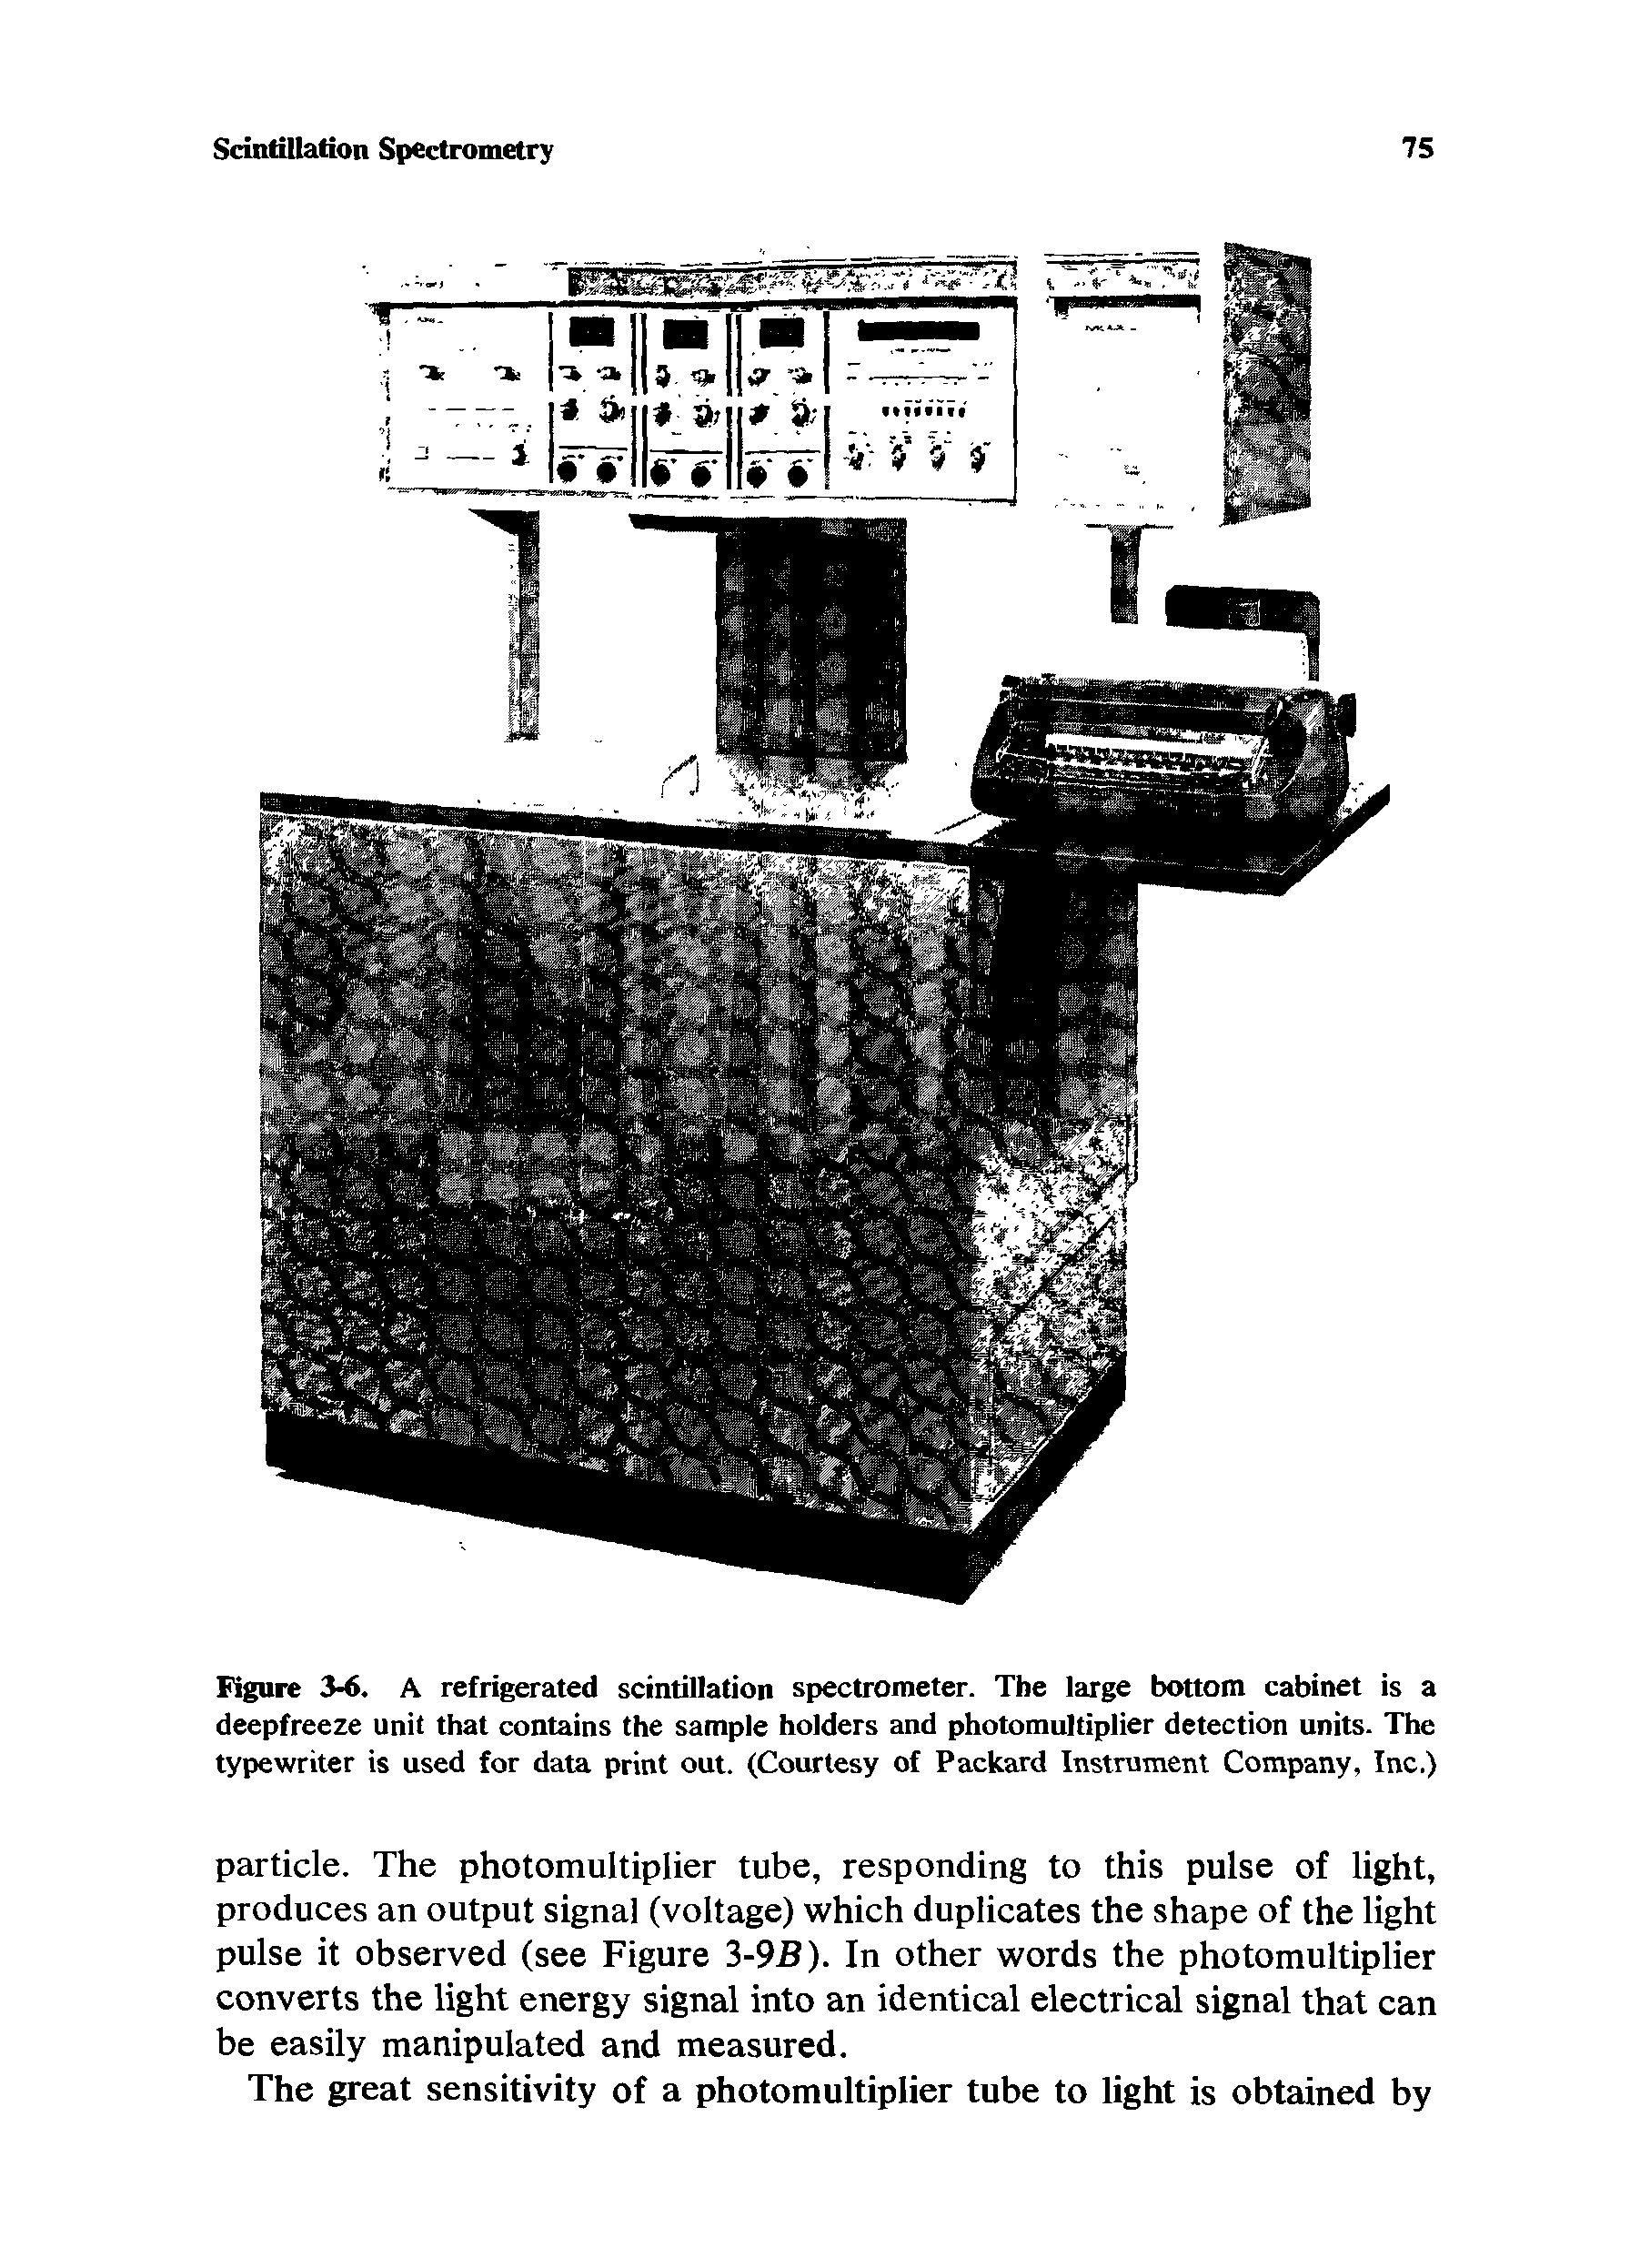 Figure 3-6. A refrigerated scintillation spectrometer. The large bottom cabinet is a deepfreeze unit that contains the sample holders and photomultiplier detection units. The typewriter is used for data print out. (Courtesy of Packard Instrument Company, Inc.)...